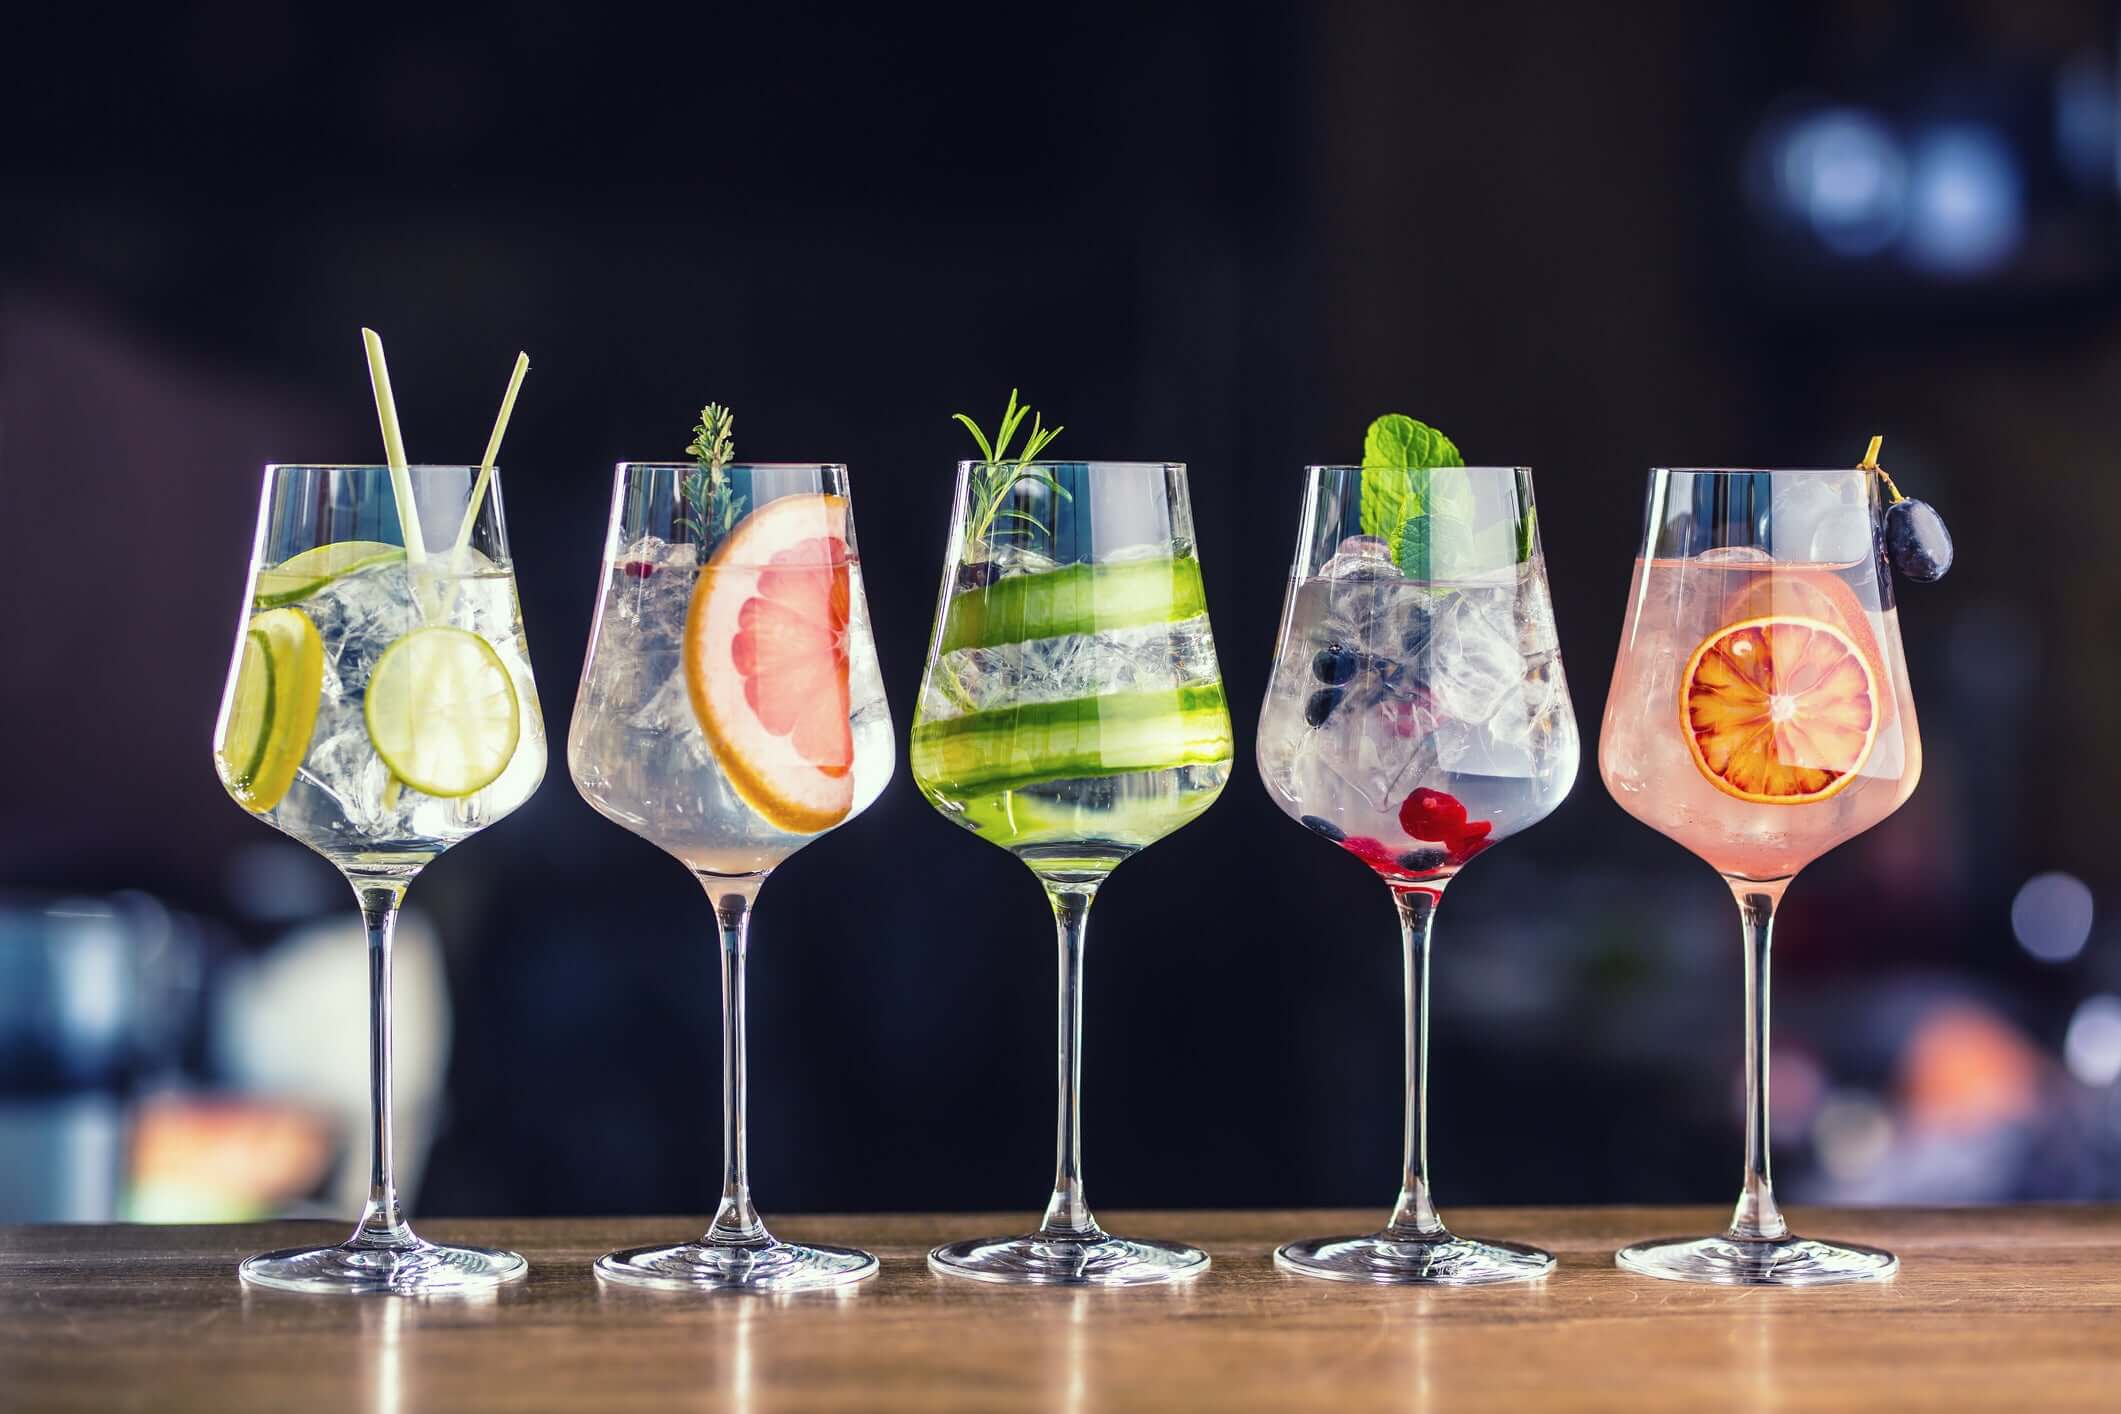 The 5 different types of Gin